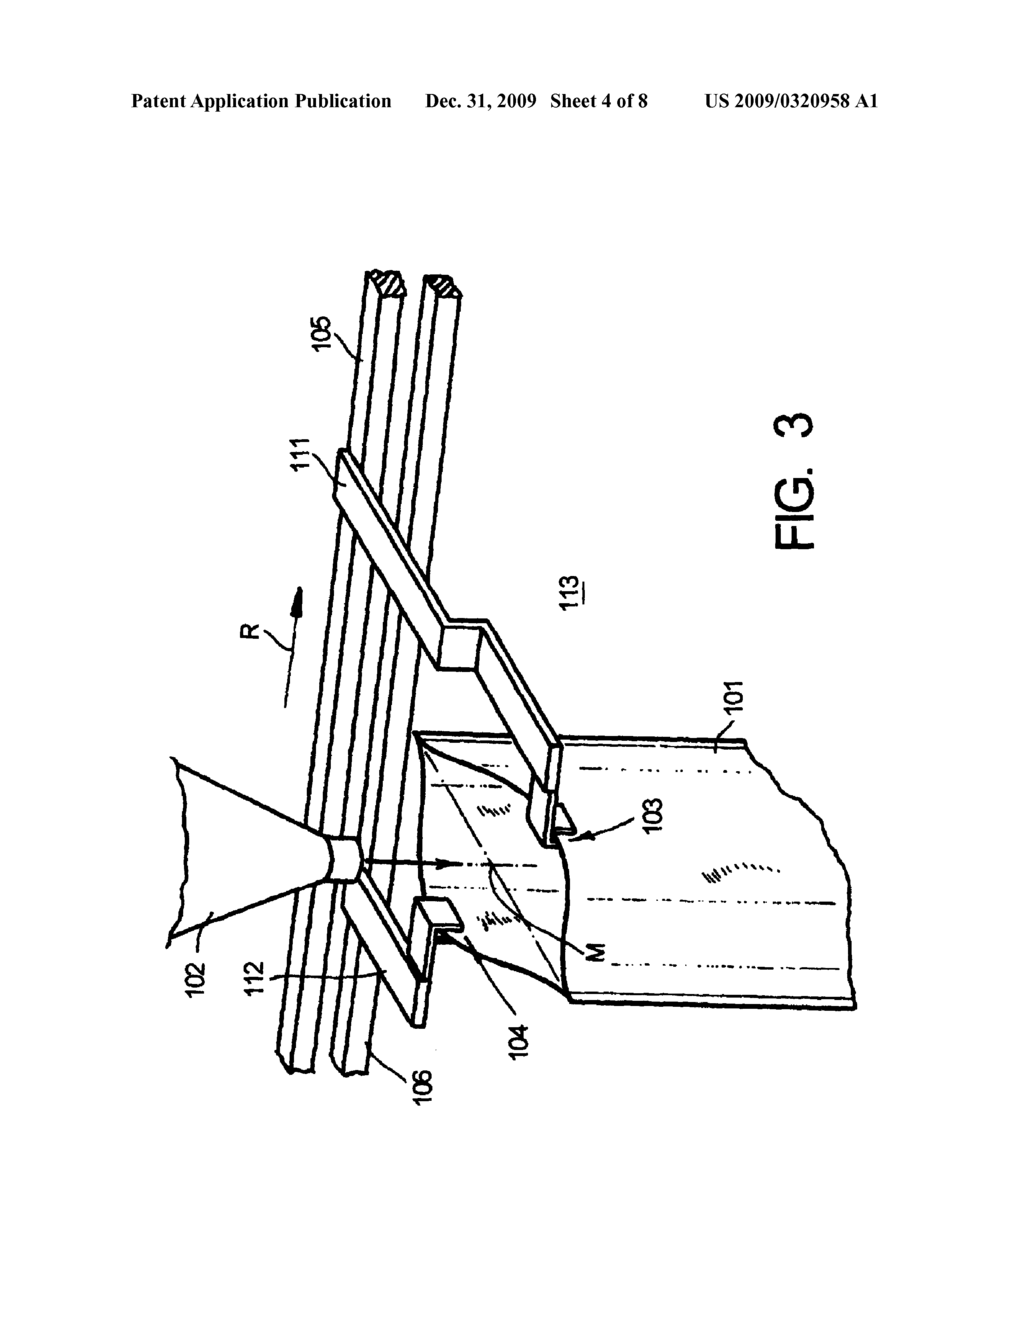 APPARATUS FOR THE FILLING OF BAGS HAVING AT LEAST ONE OPENING THEREIN AND HAVING SPACE TO PERMIT DECREASED ACCUMULATION OF FILLING MATERIALS - diagram, schematic, and image 05